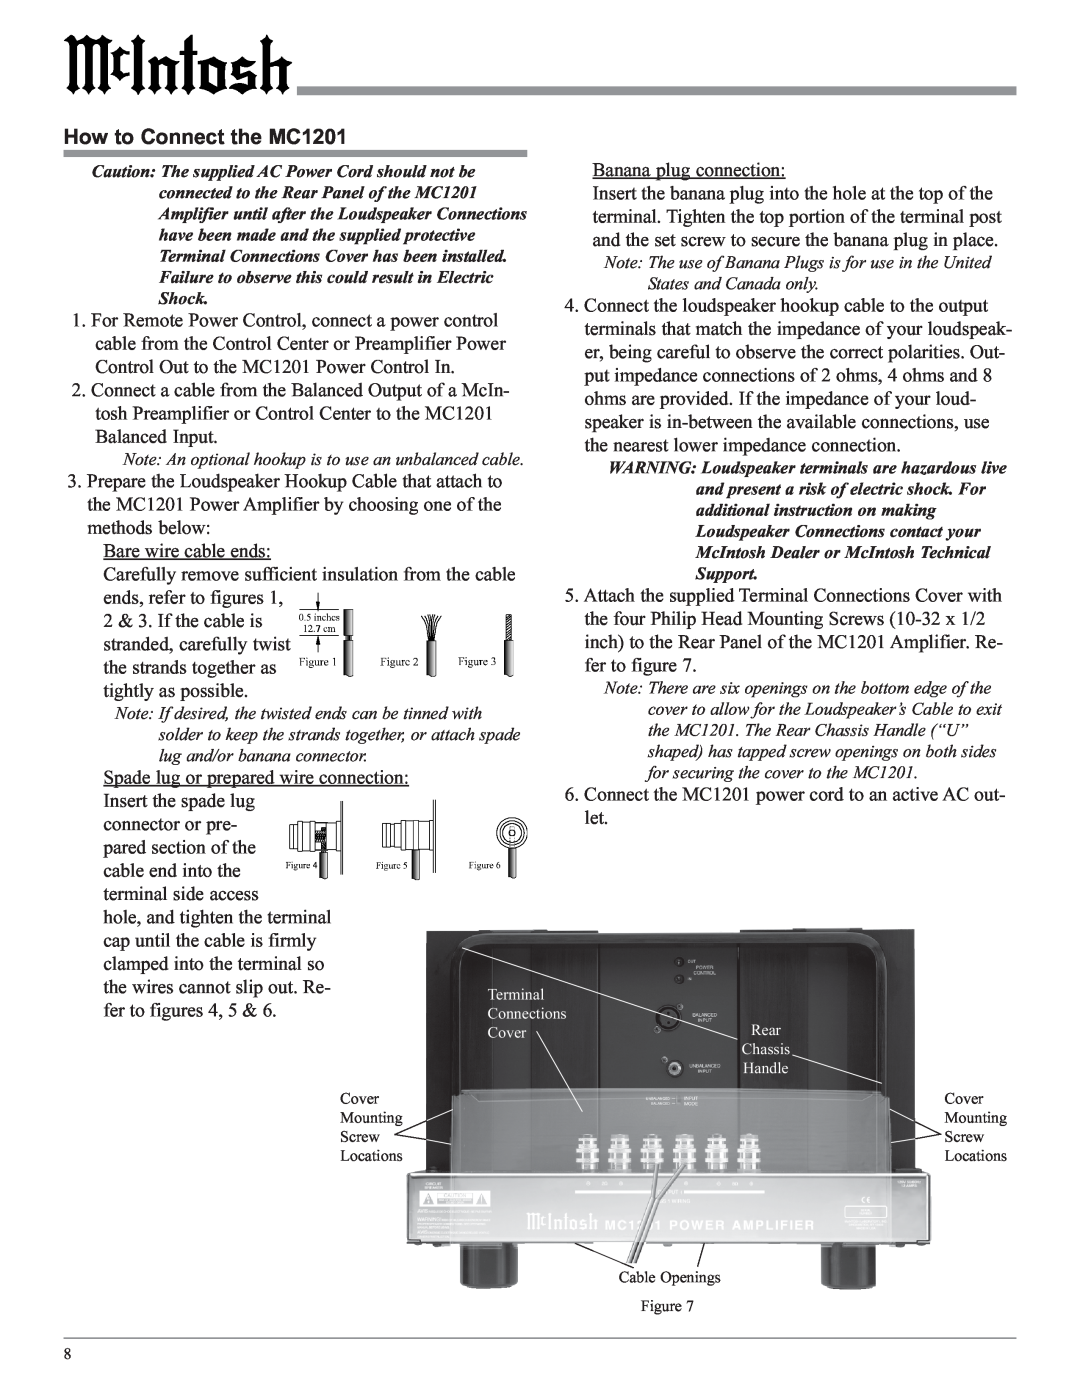 McIntosh manual How to Connect the MC1201 